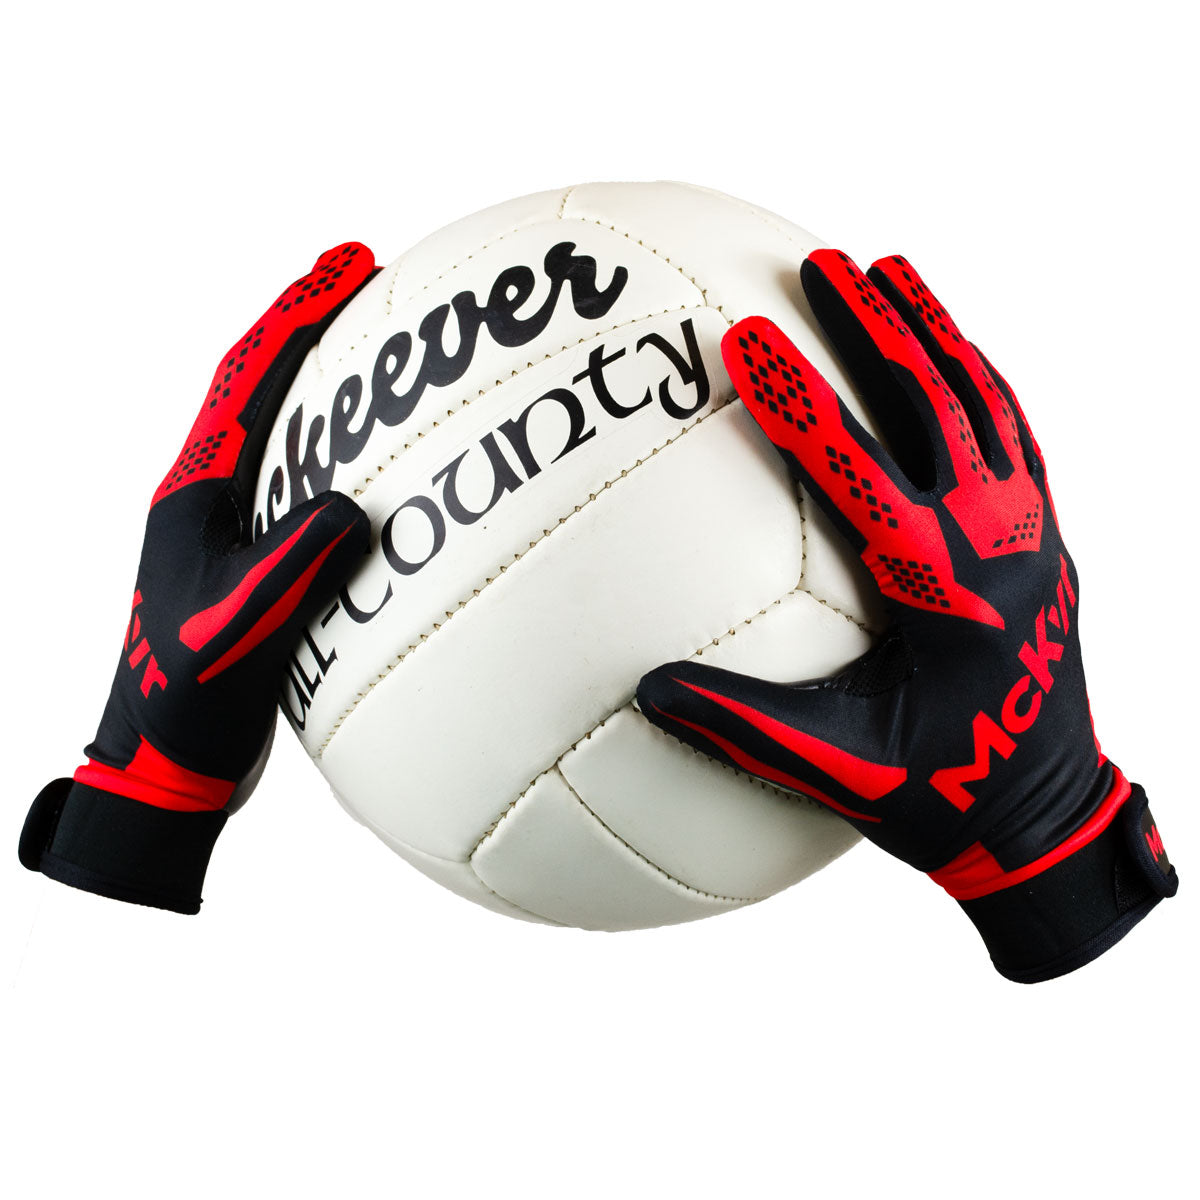 Mc Keever 2.0 Gaelic Gloves - Youth - Black/Red